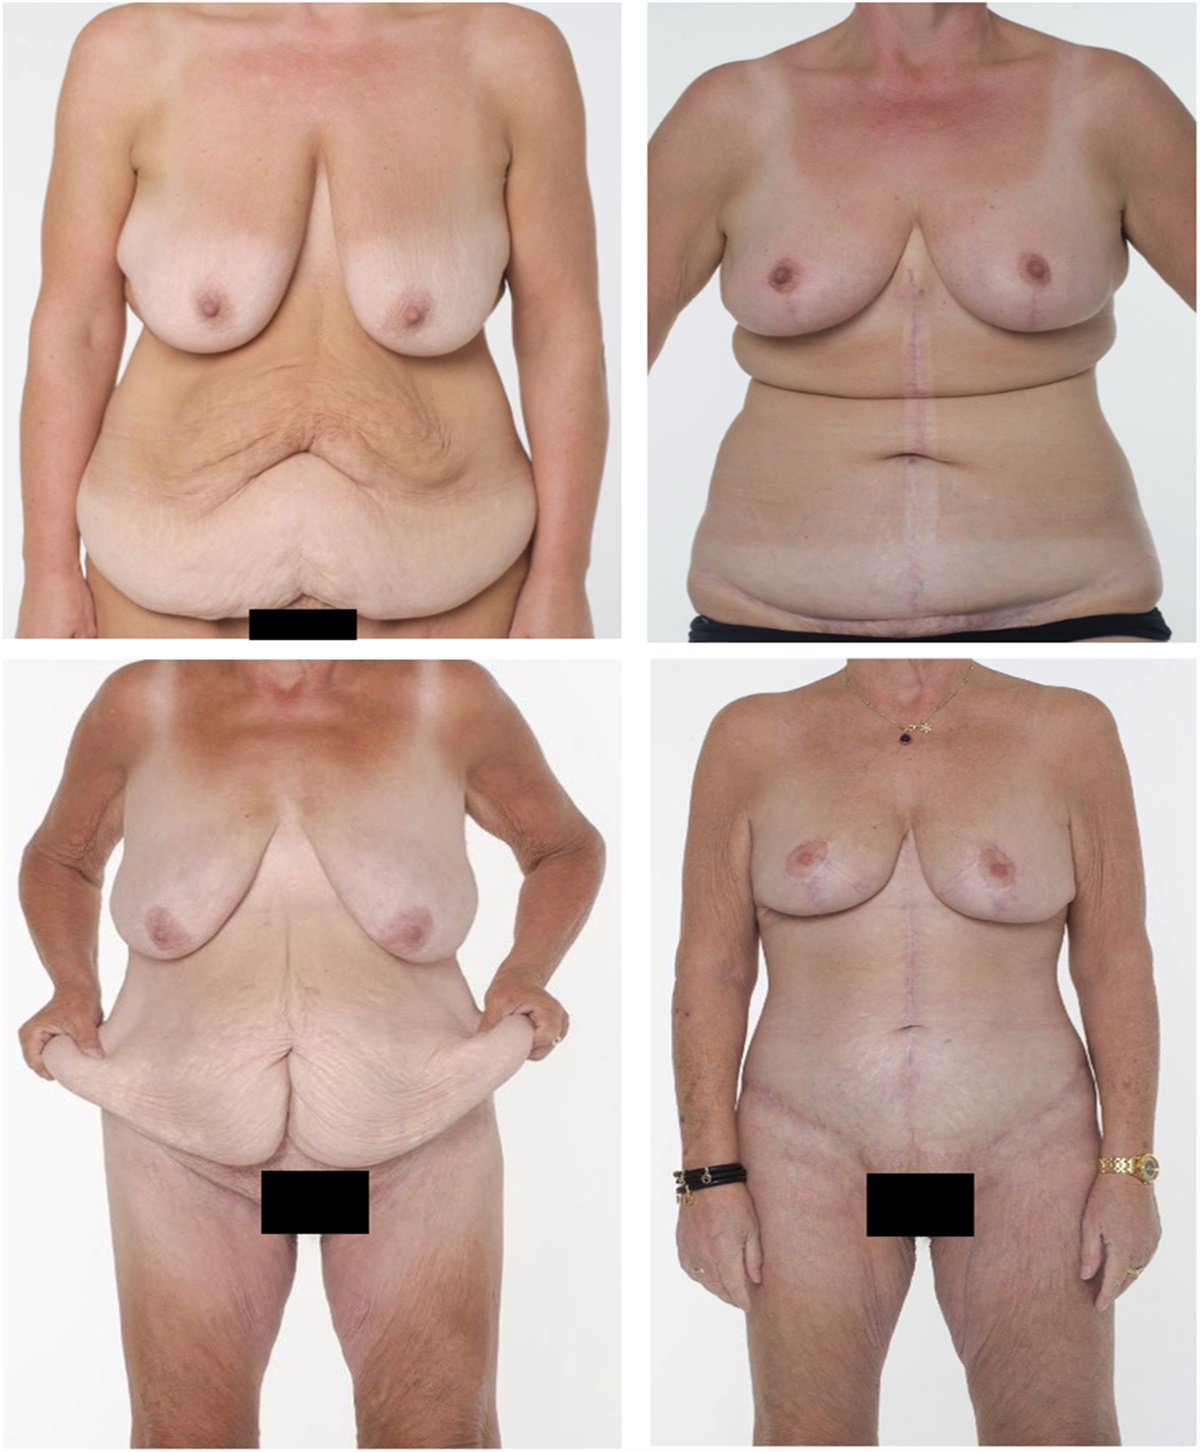 Body Contouring Surgery After Bariatric Surgery Improves Long-Term Health-Related Quality of Life and Satisfaction With Appearance: An International Longitudinal Cohort Study Using the BODY-Q